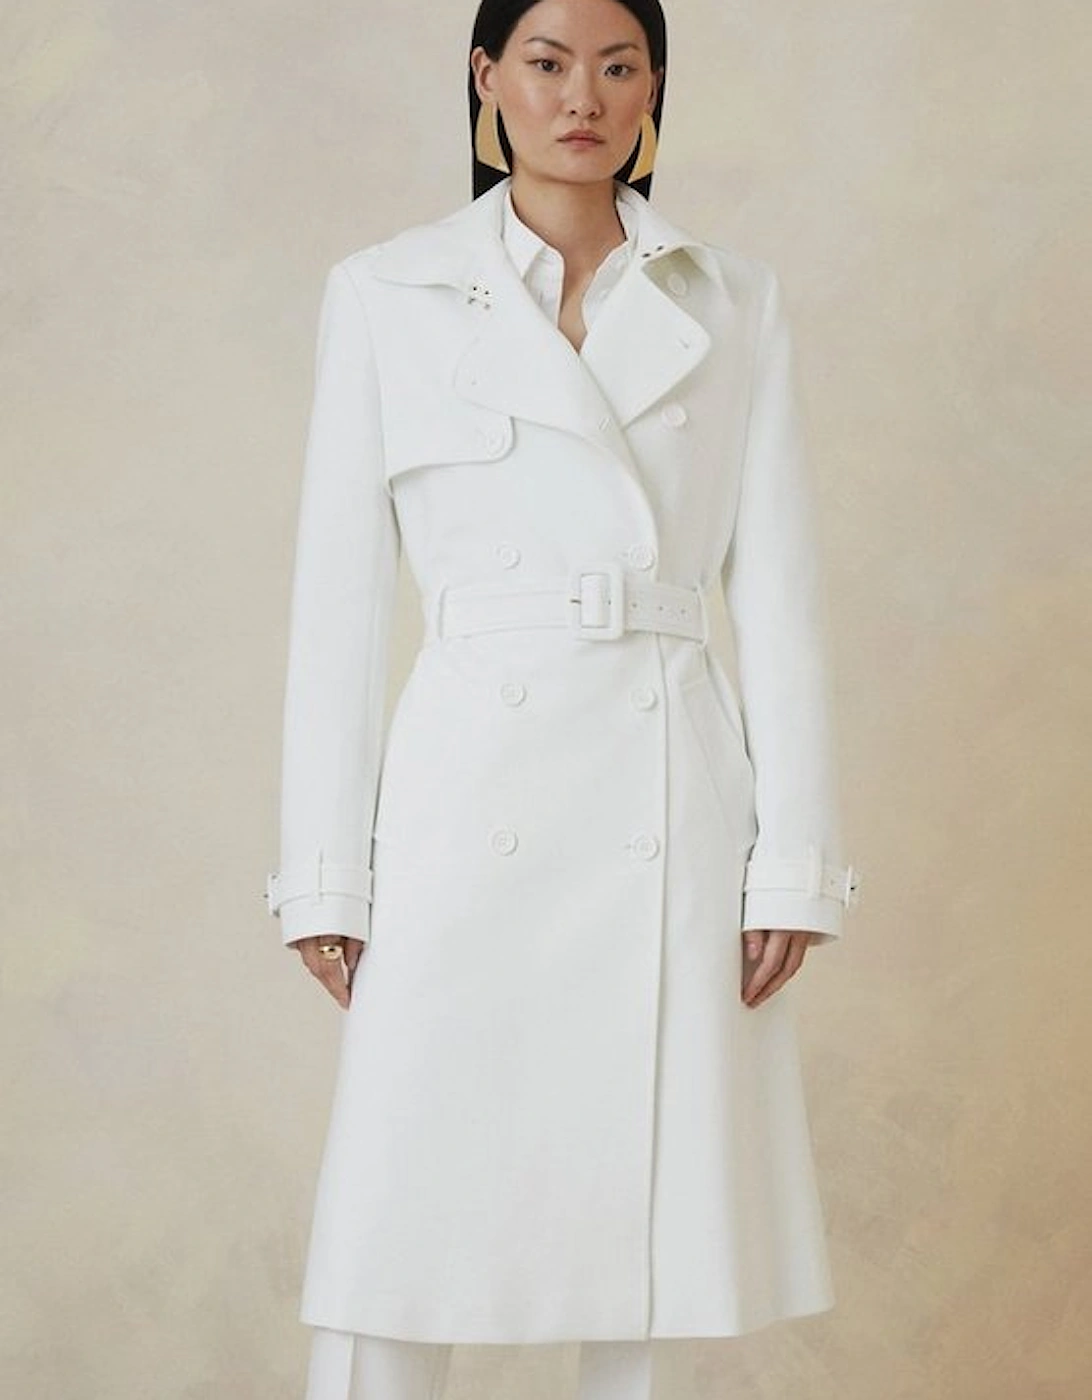 Petite The Founder Compact Stretch Belted Tailored Coat